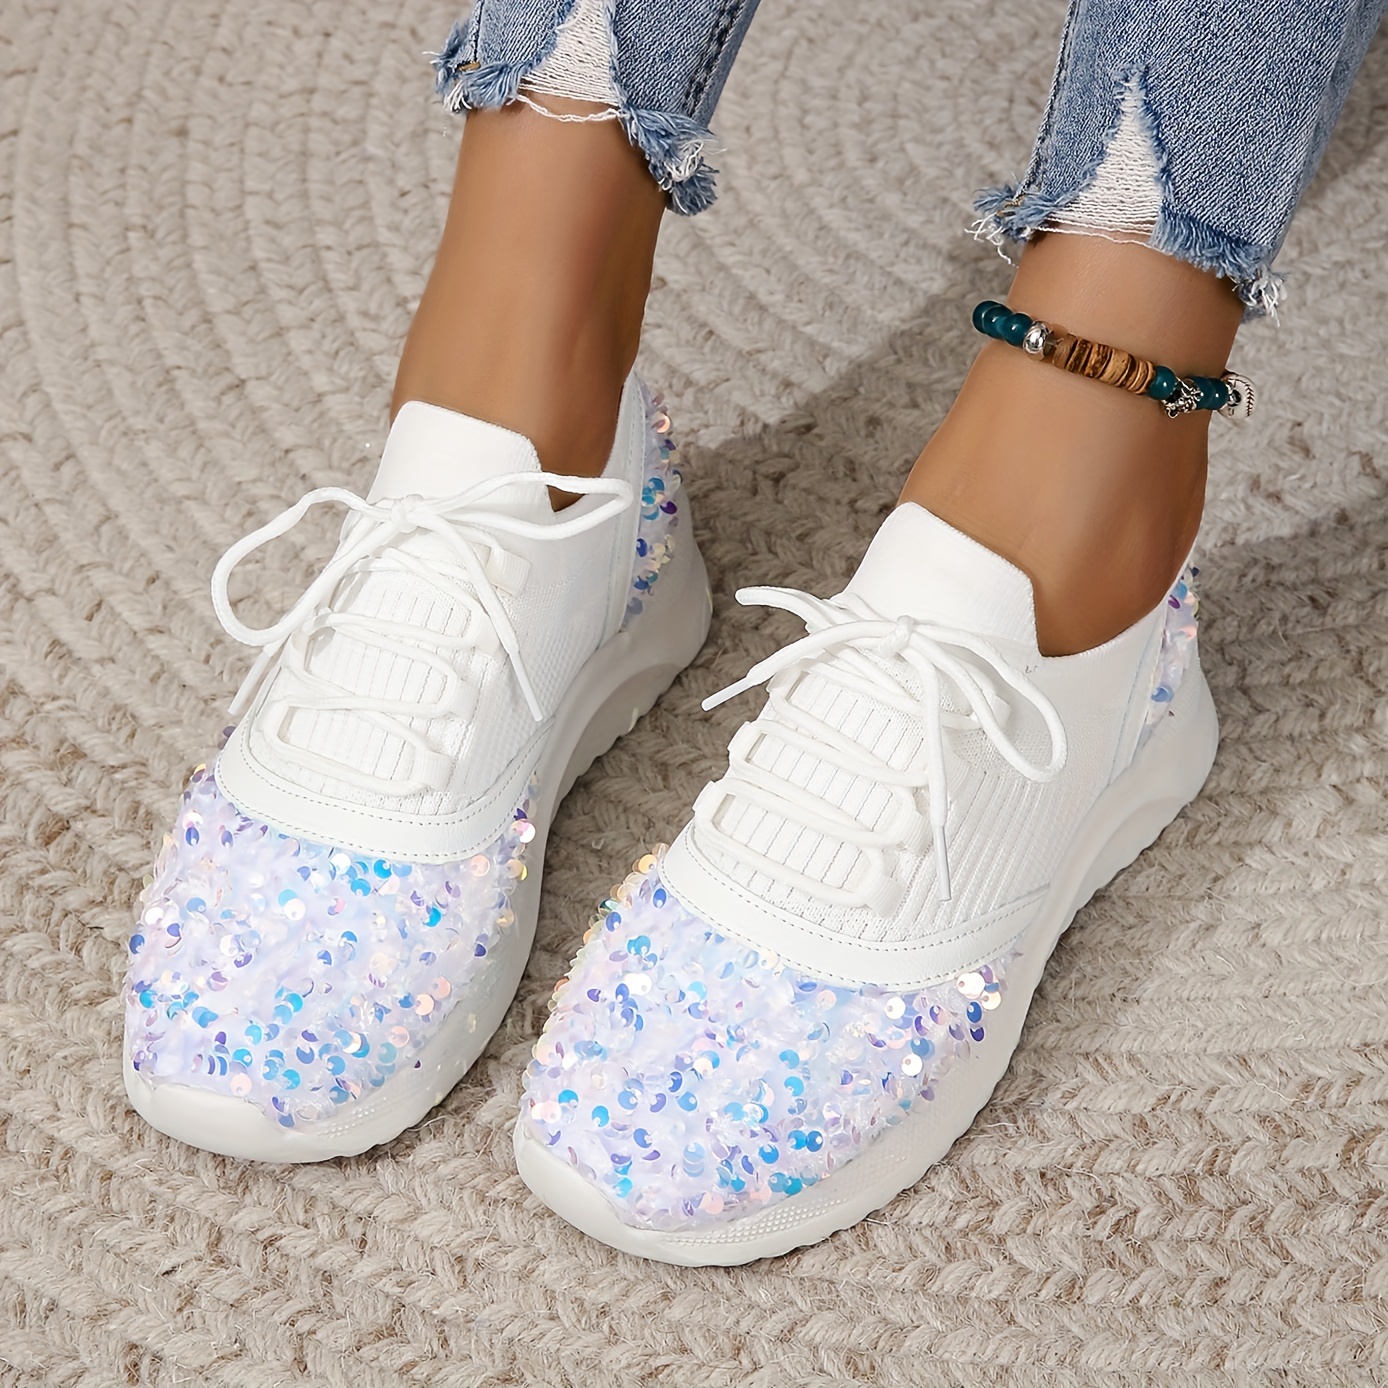 Womens Glitter Tennis Shoes Shiny Crystal Platform Sneakers  Casual sneakers  women, Glitter tennis shoes, Sneakers fashion